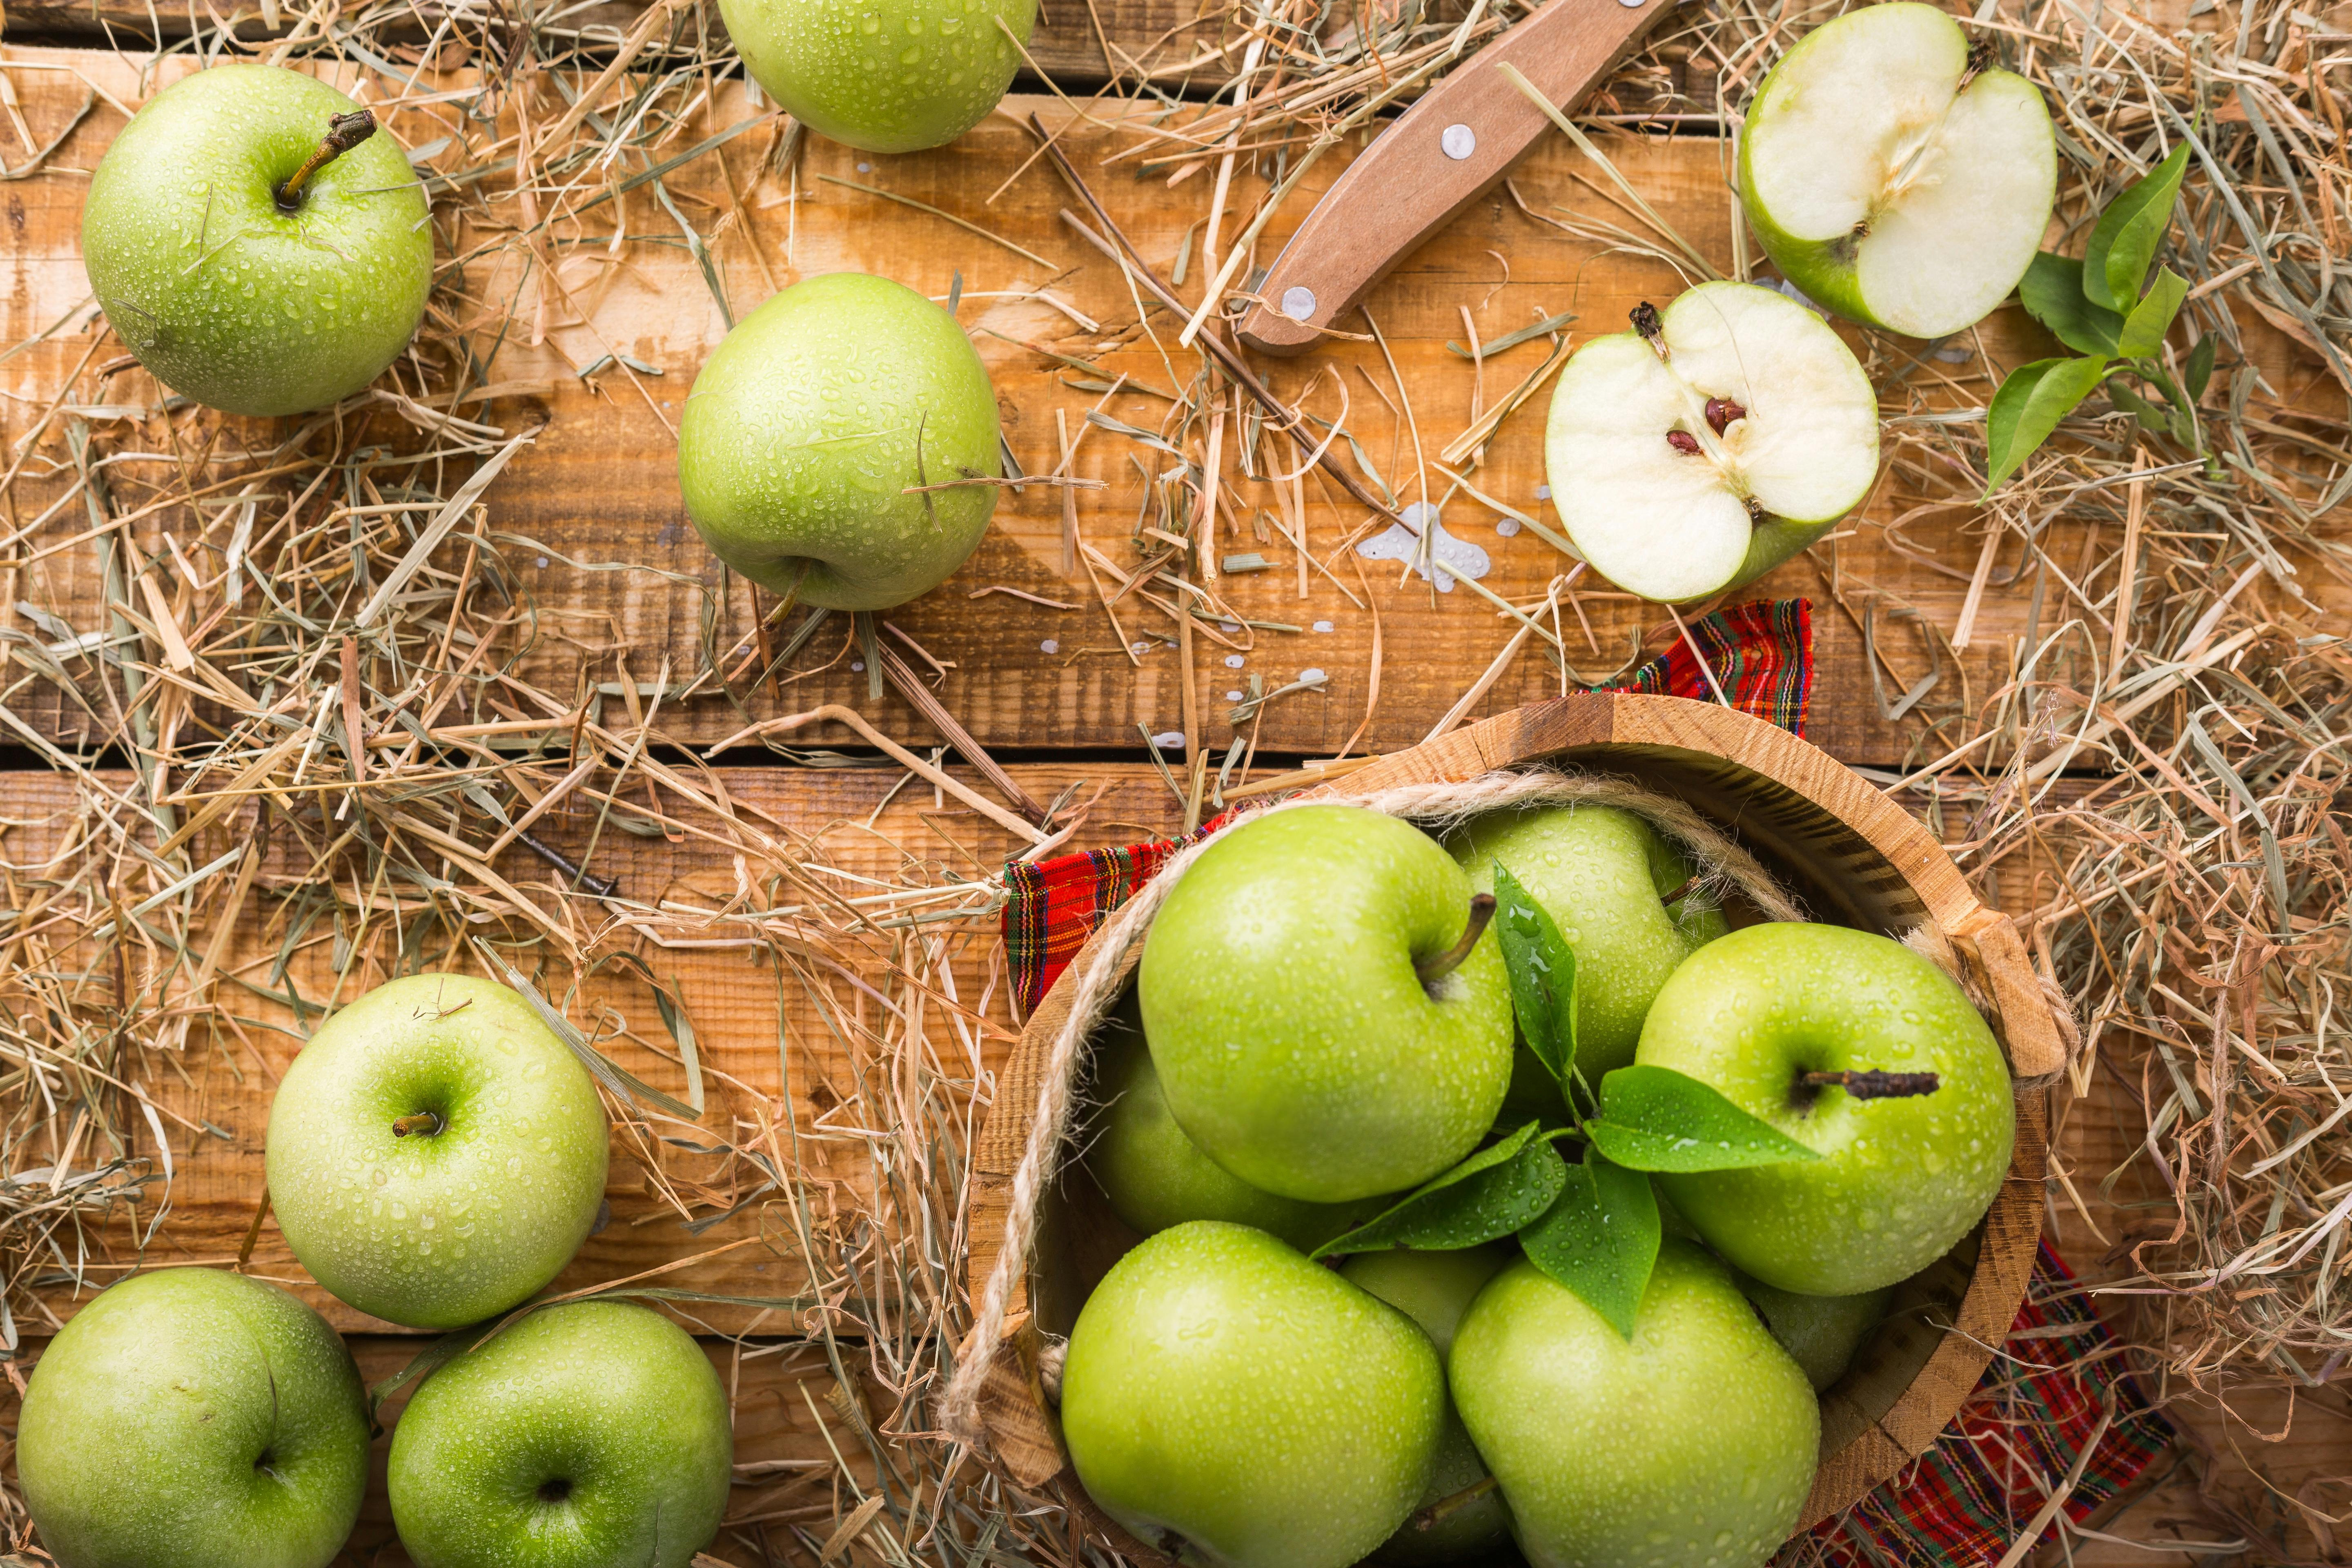 organic juicy green apples. above view Stock Photo by nblxer